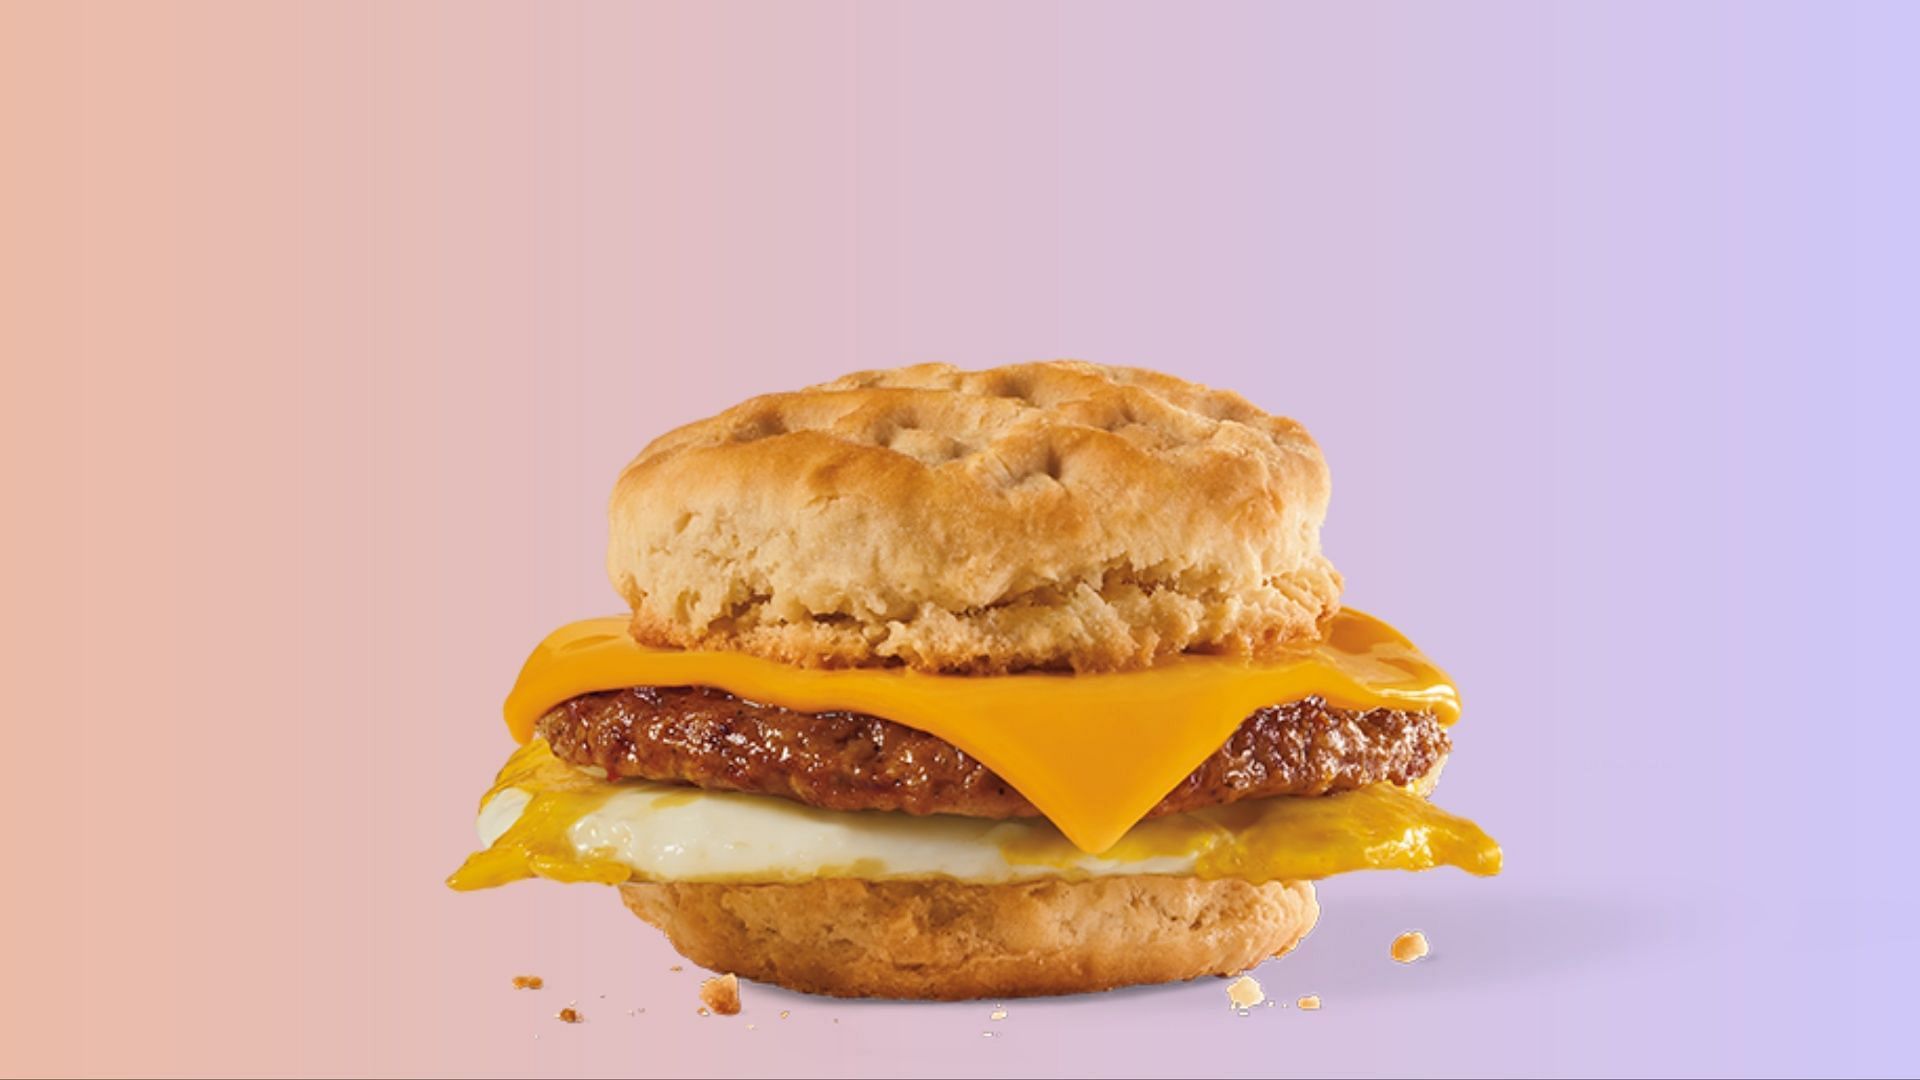 Sausage Cheddar Biscuit Breakfast Sandwich (Image via Jack in the Box)